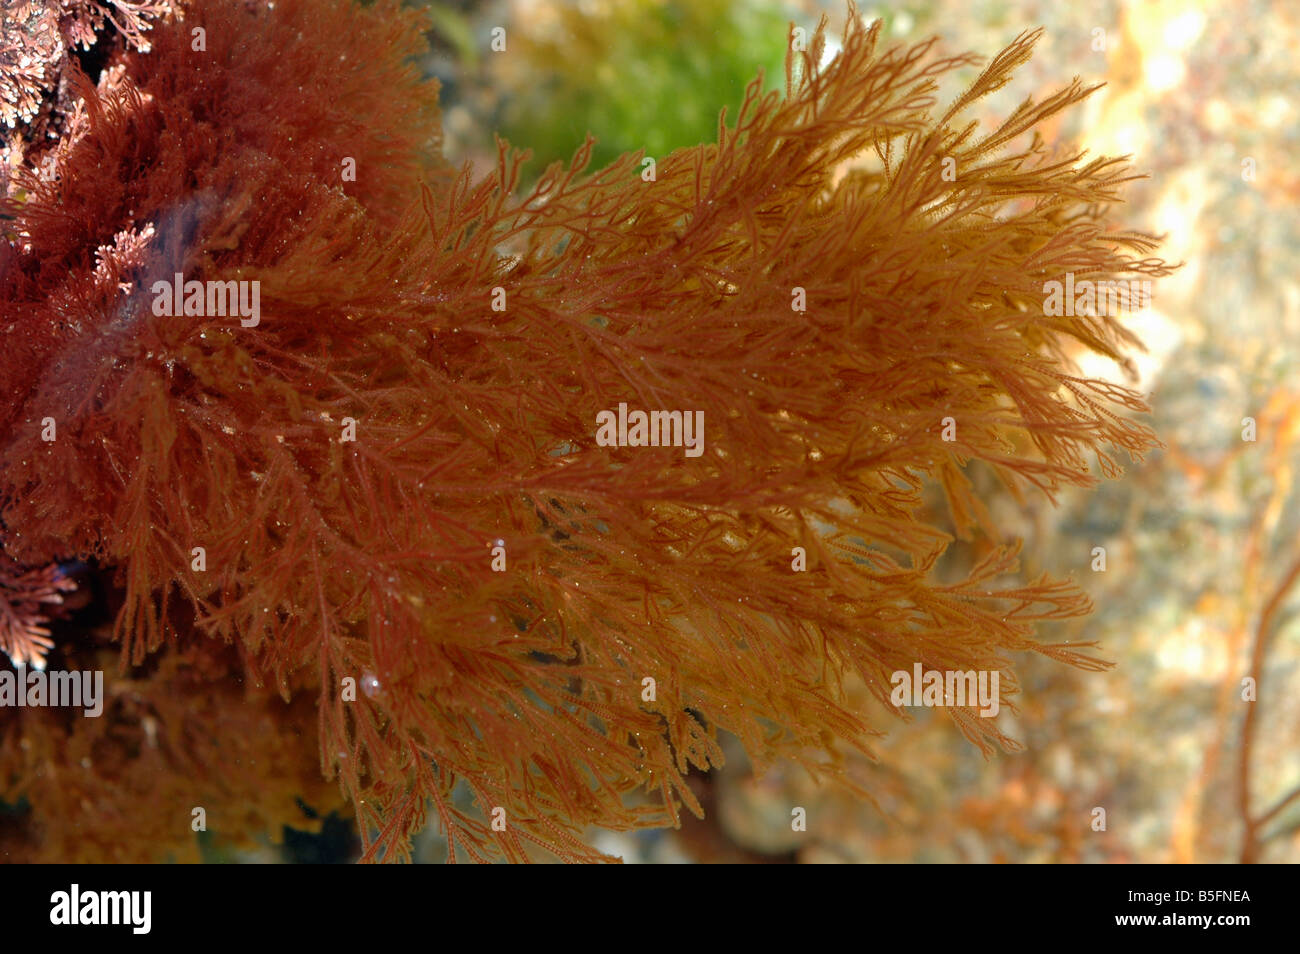 CERAMIUM RUBRUM Common pincer weed a red seaweed in a rockpool UK Stock Photo